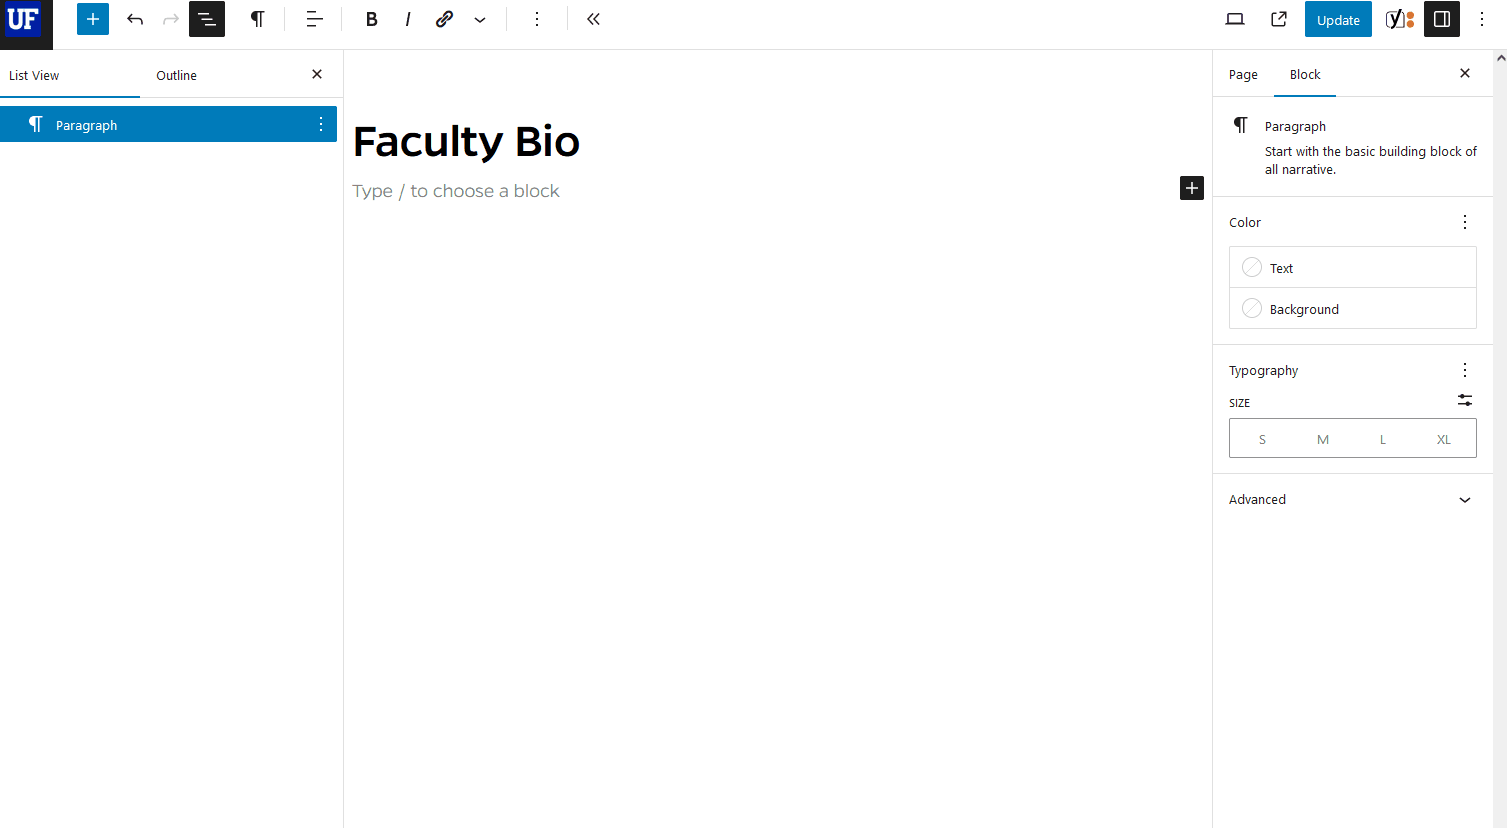 How to insert a faculty bio block in Mercury